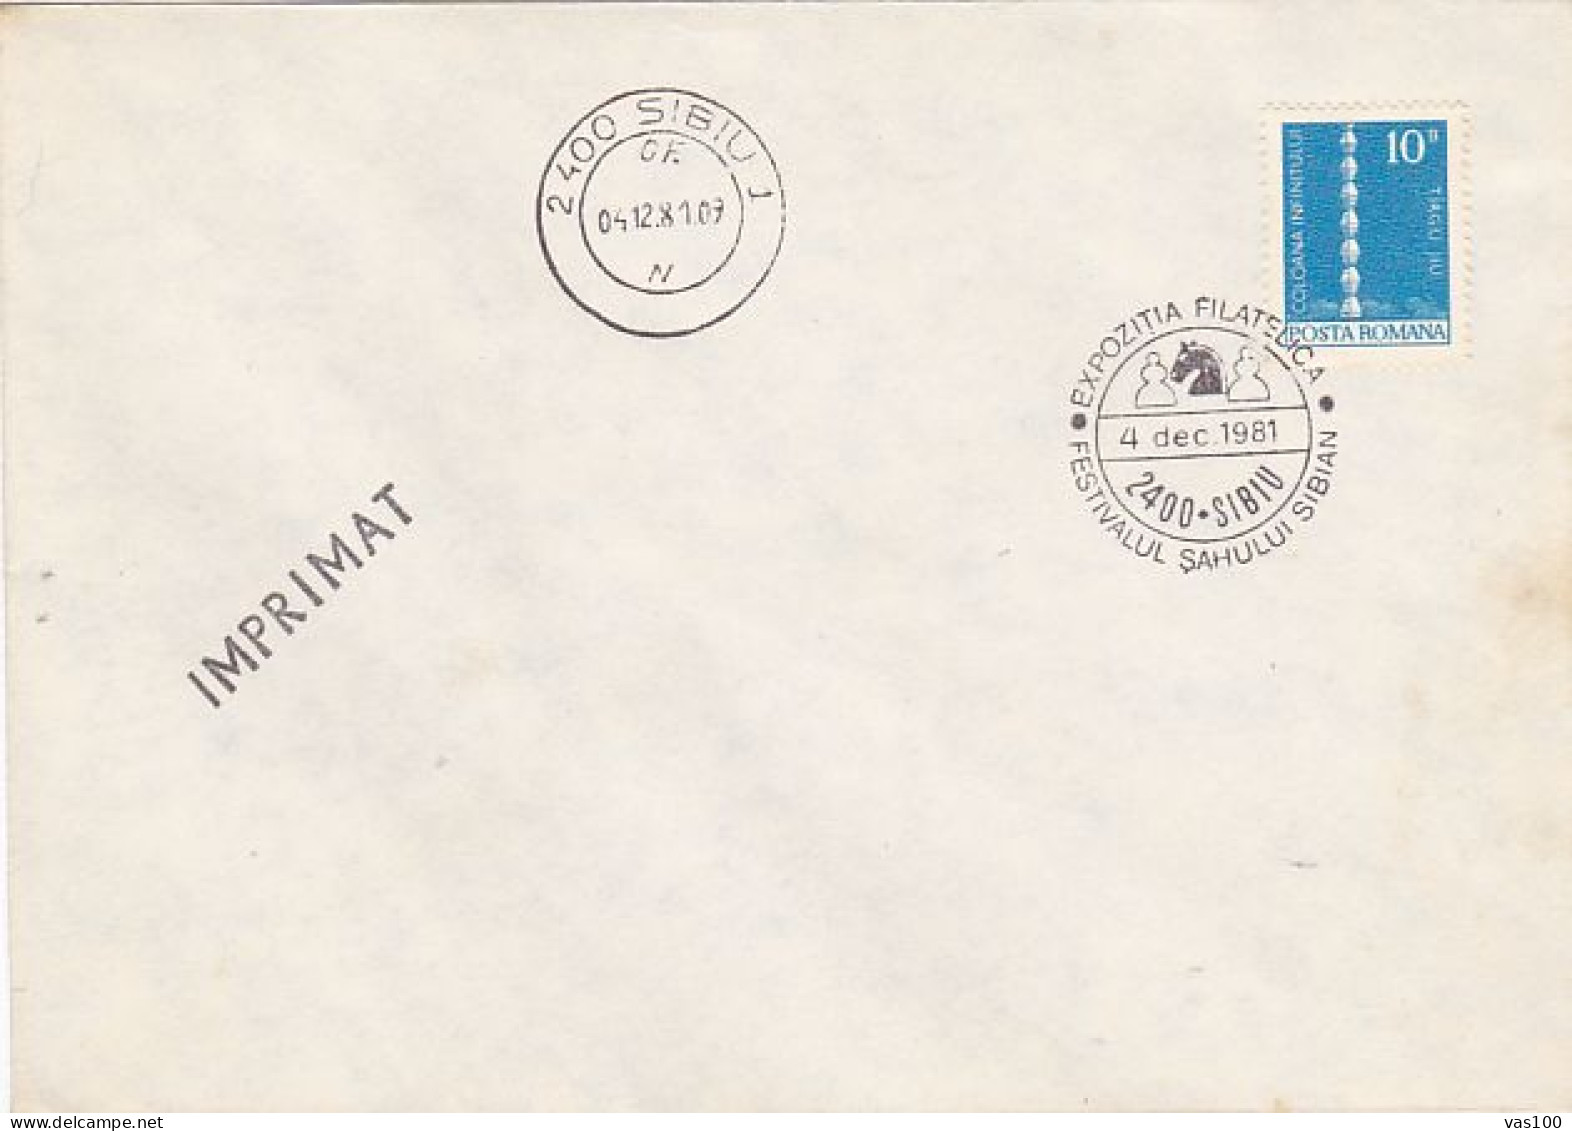 GAMES, CHESS, SIBIU CHESS FESTIVAL SPECIAL POSTMARK ON COVER, 1981, ROMANIA - Schach